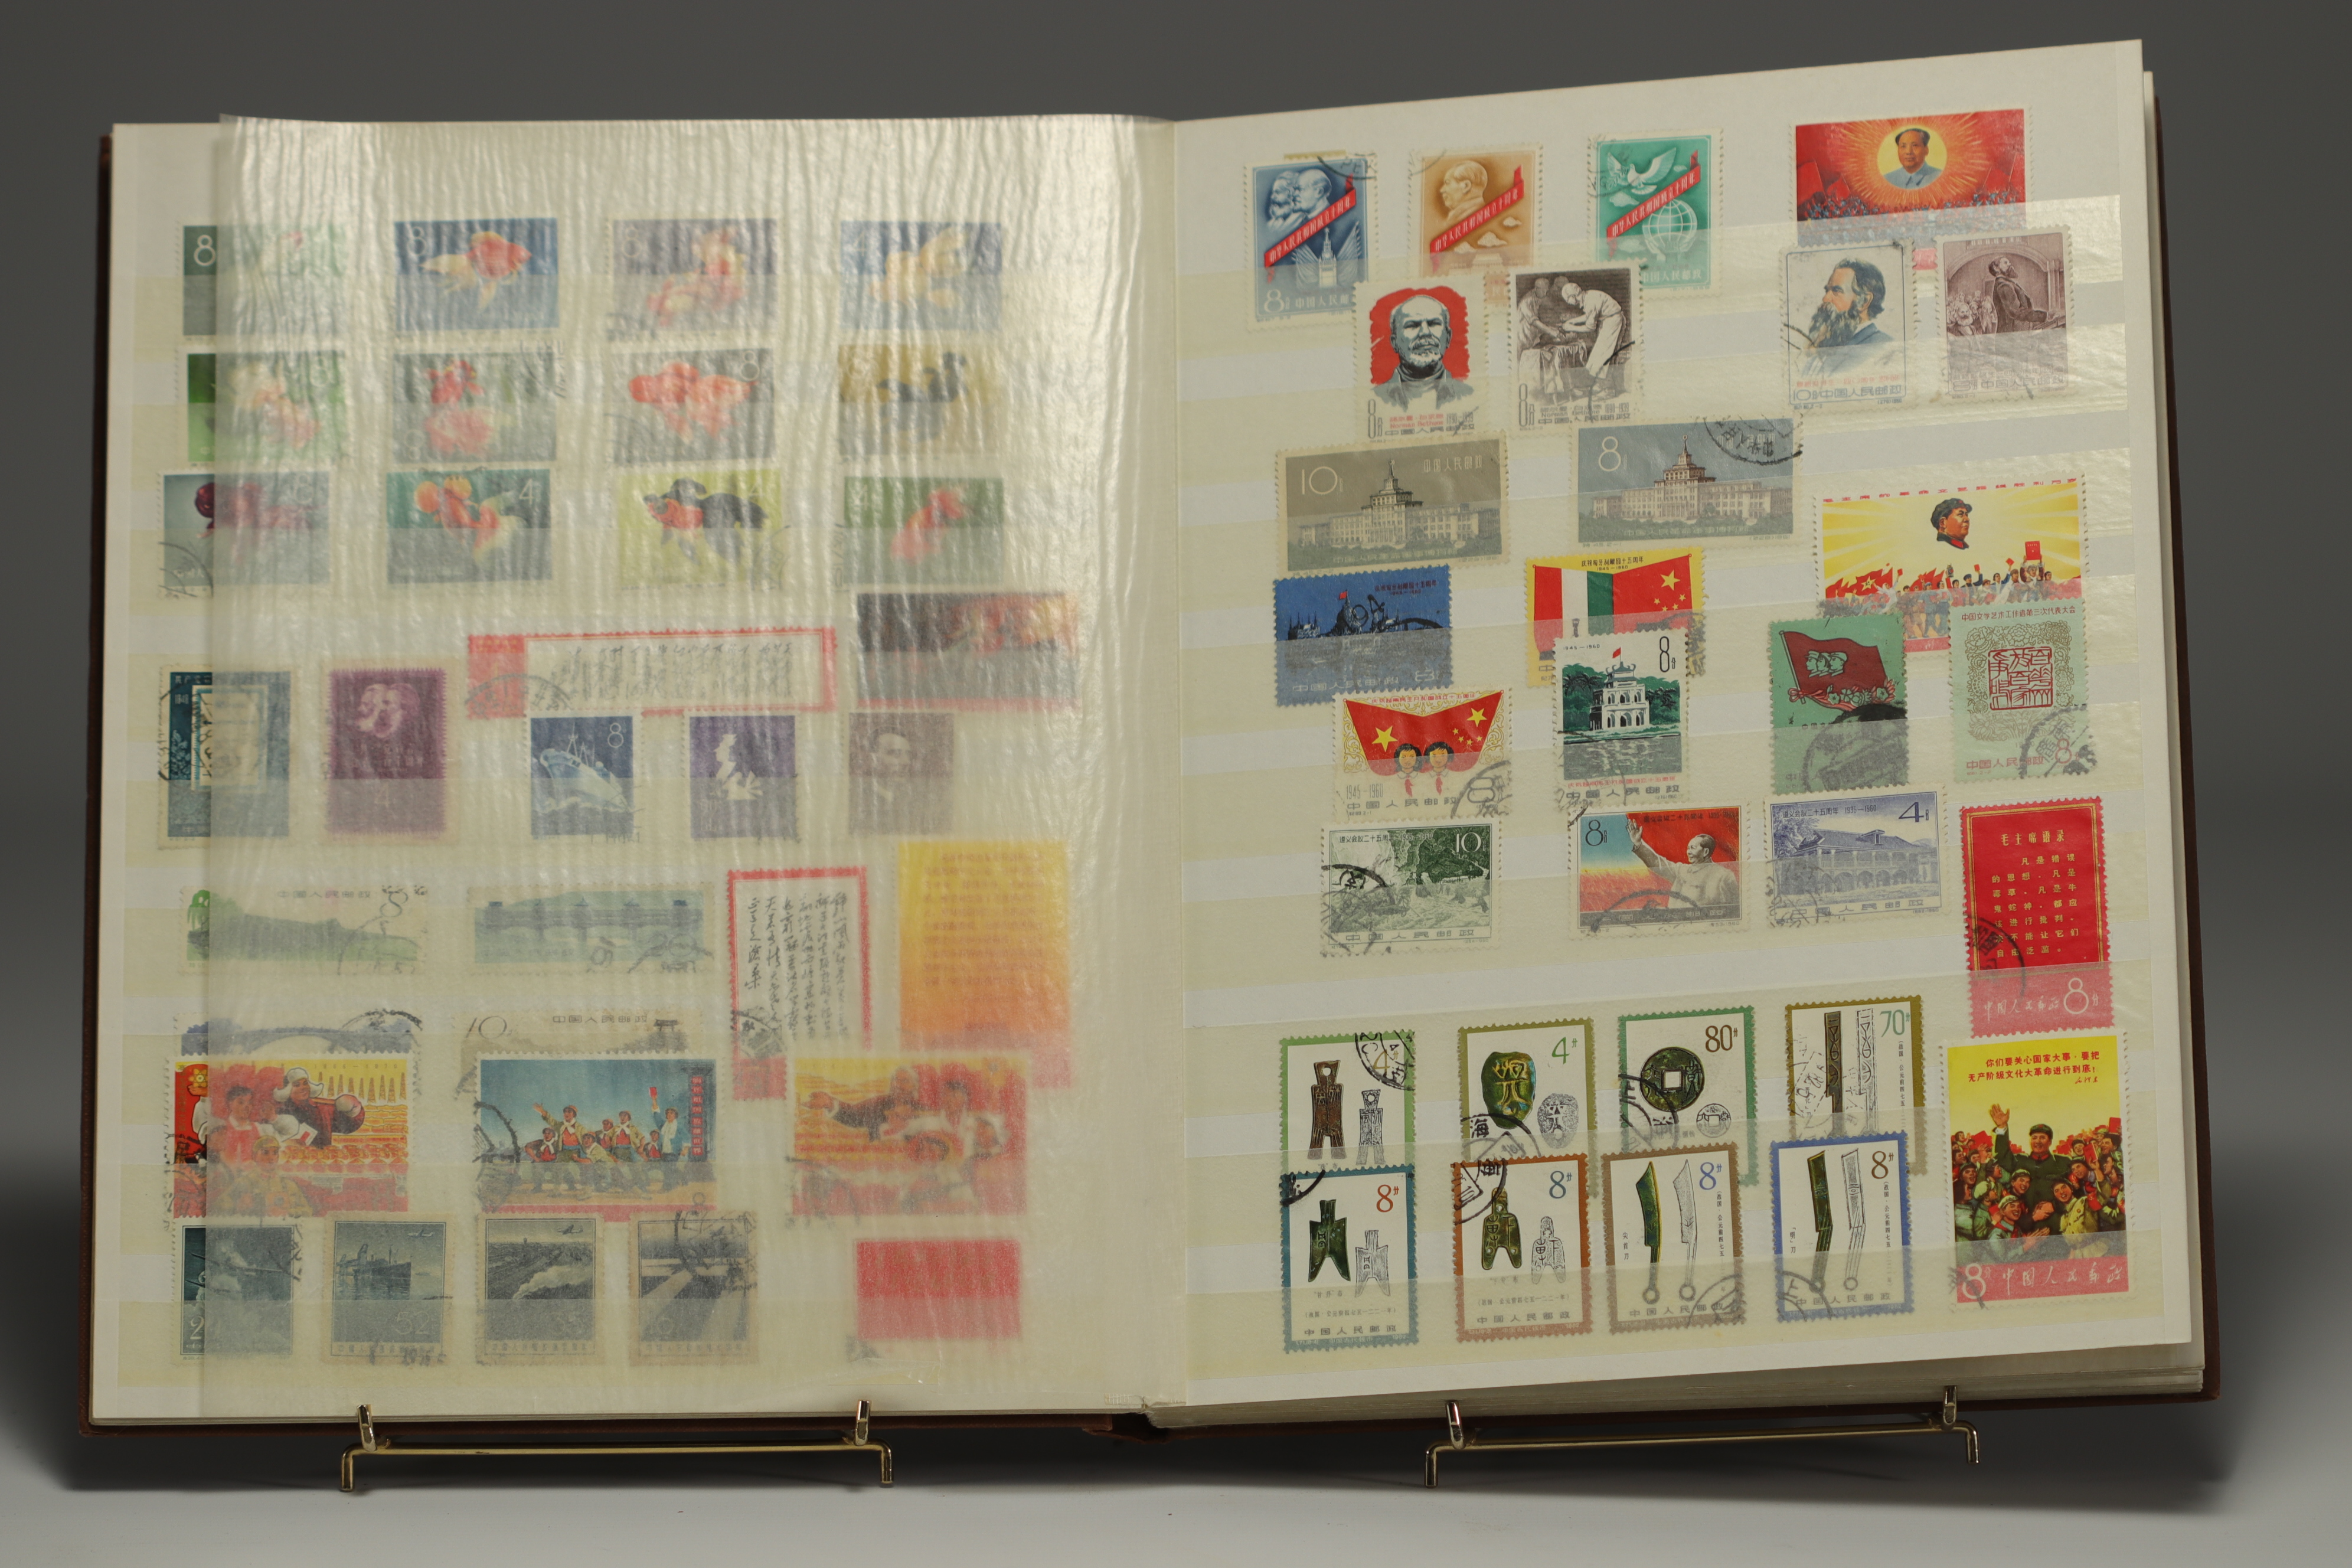 Set of 30 albums of world stamps, China, Japan, Middle East, Europe, etc. (Lot 2) - Image 16 of 22